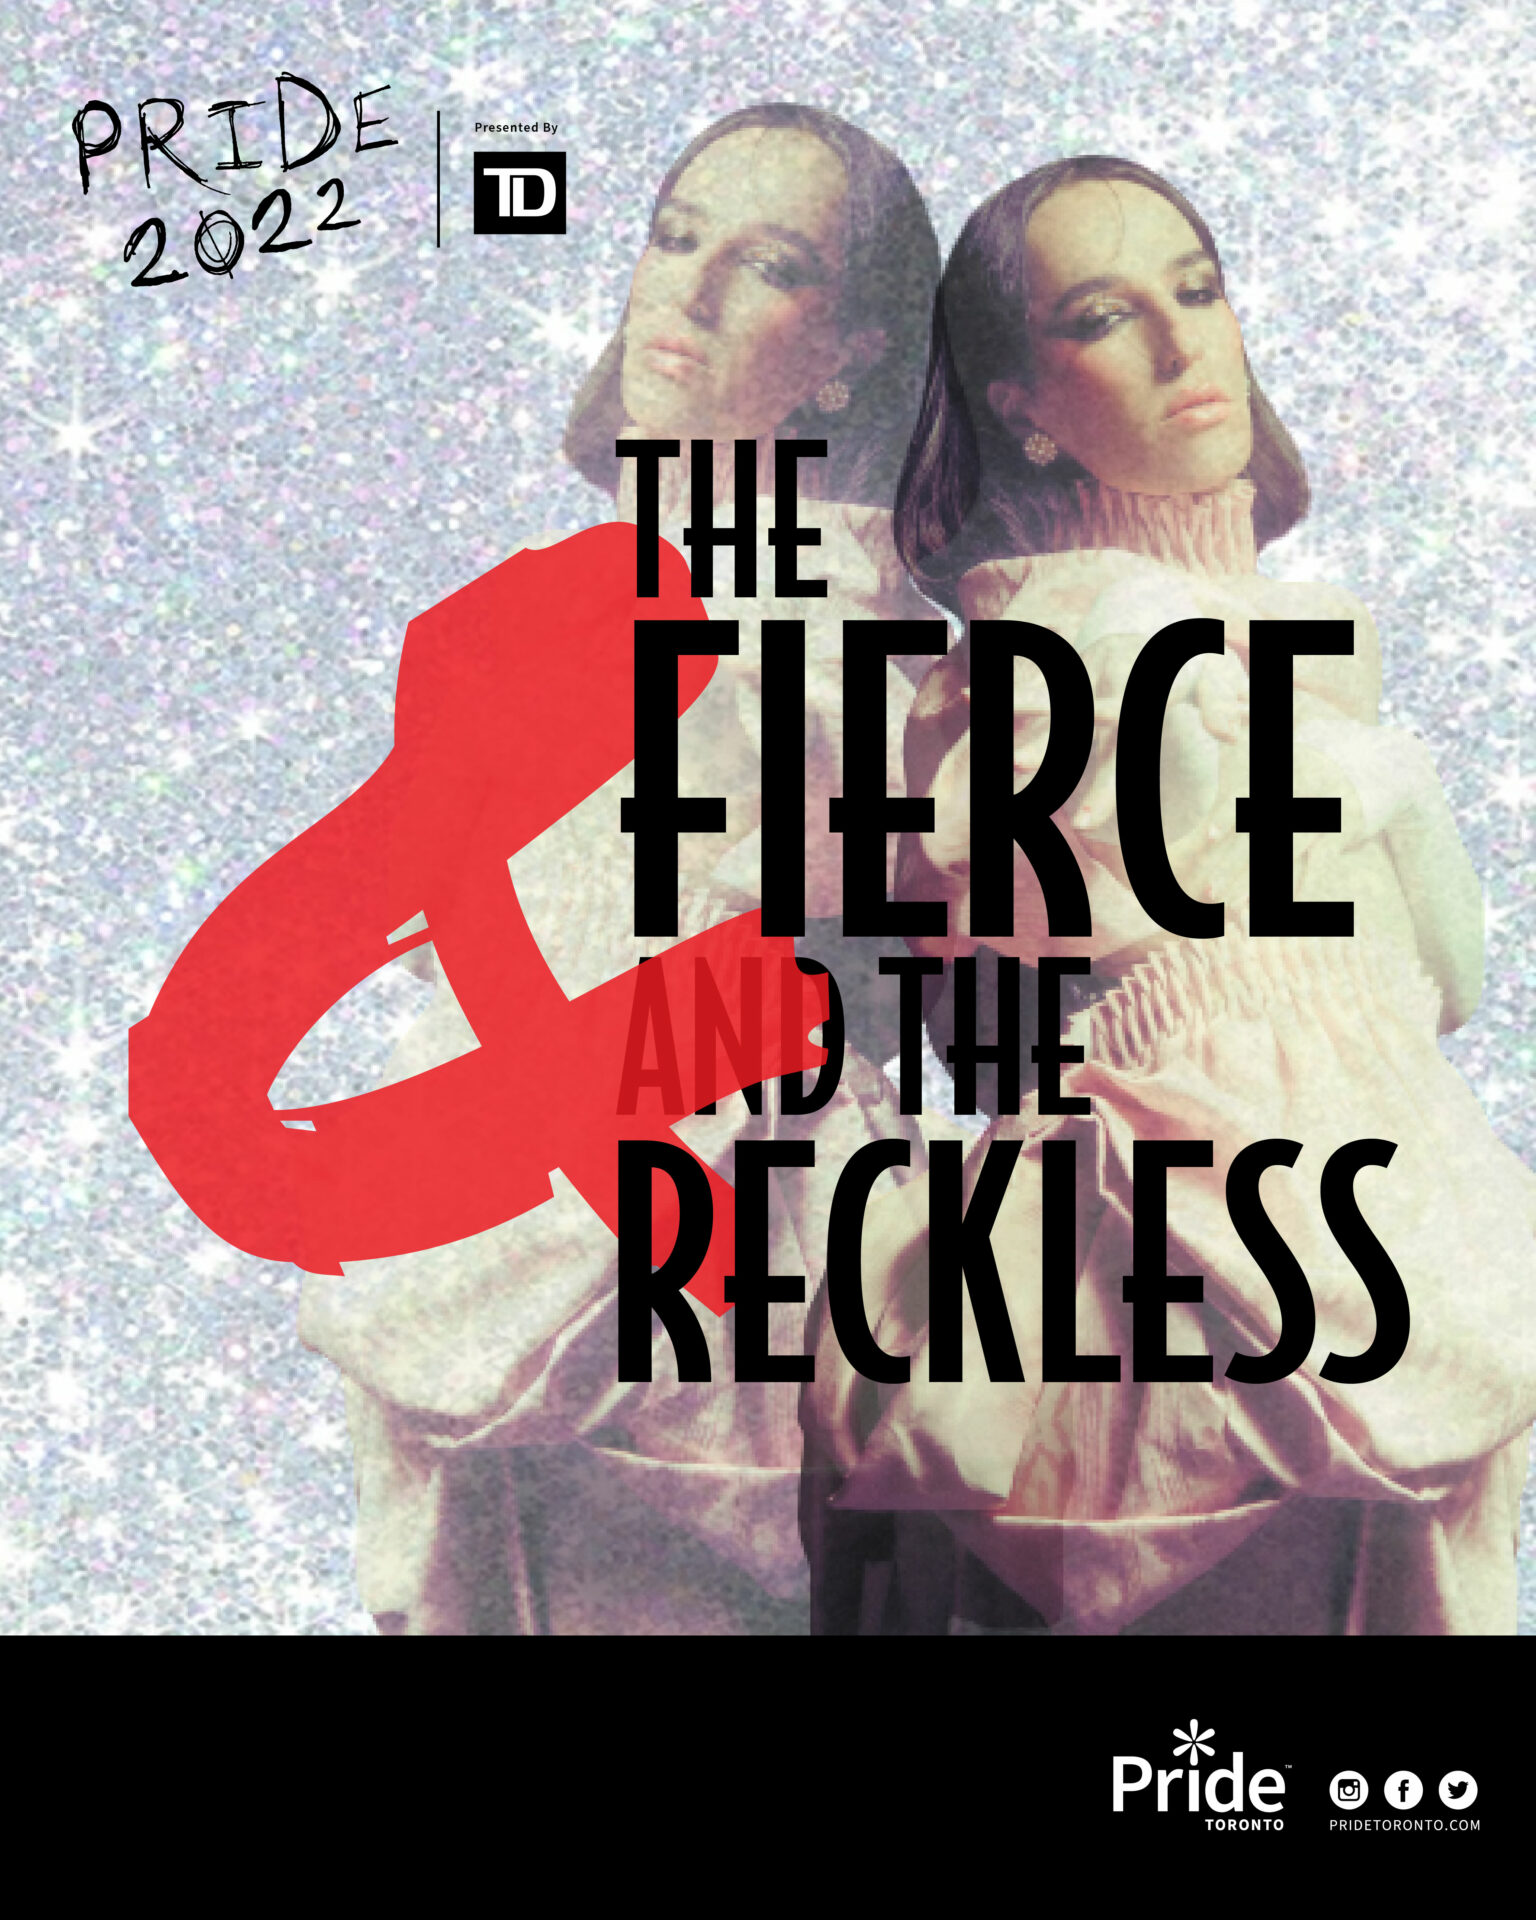 The Fiece and the Reckless Event